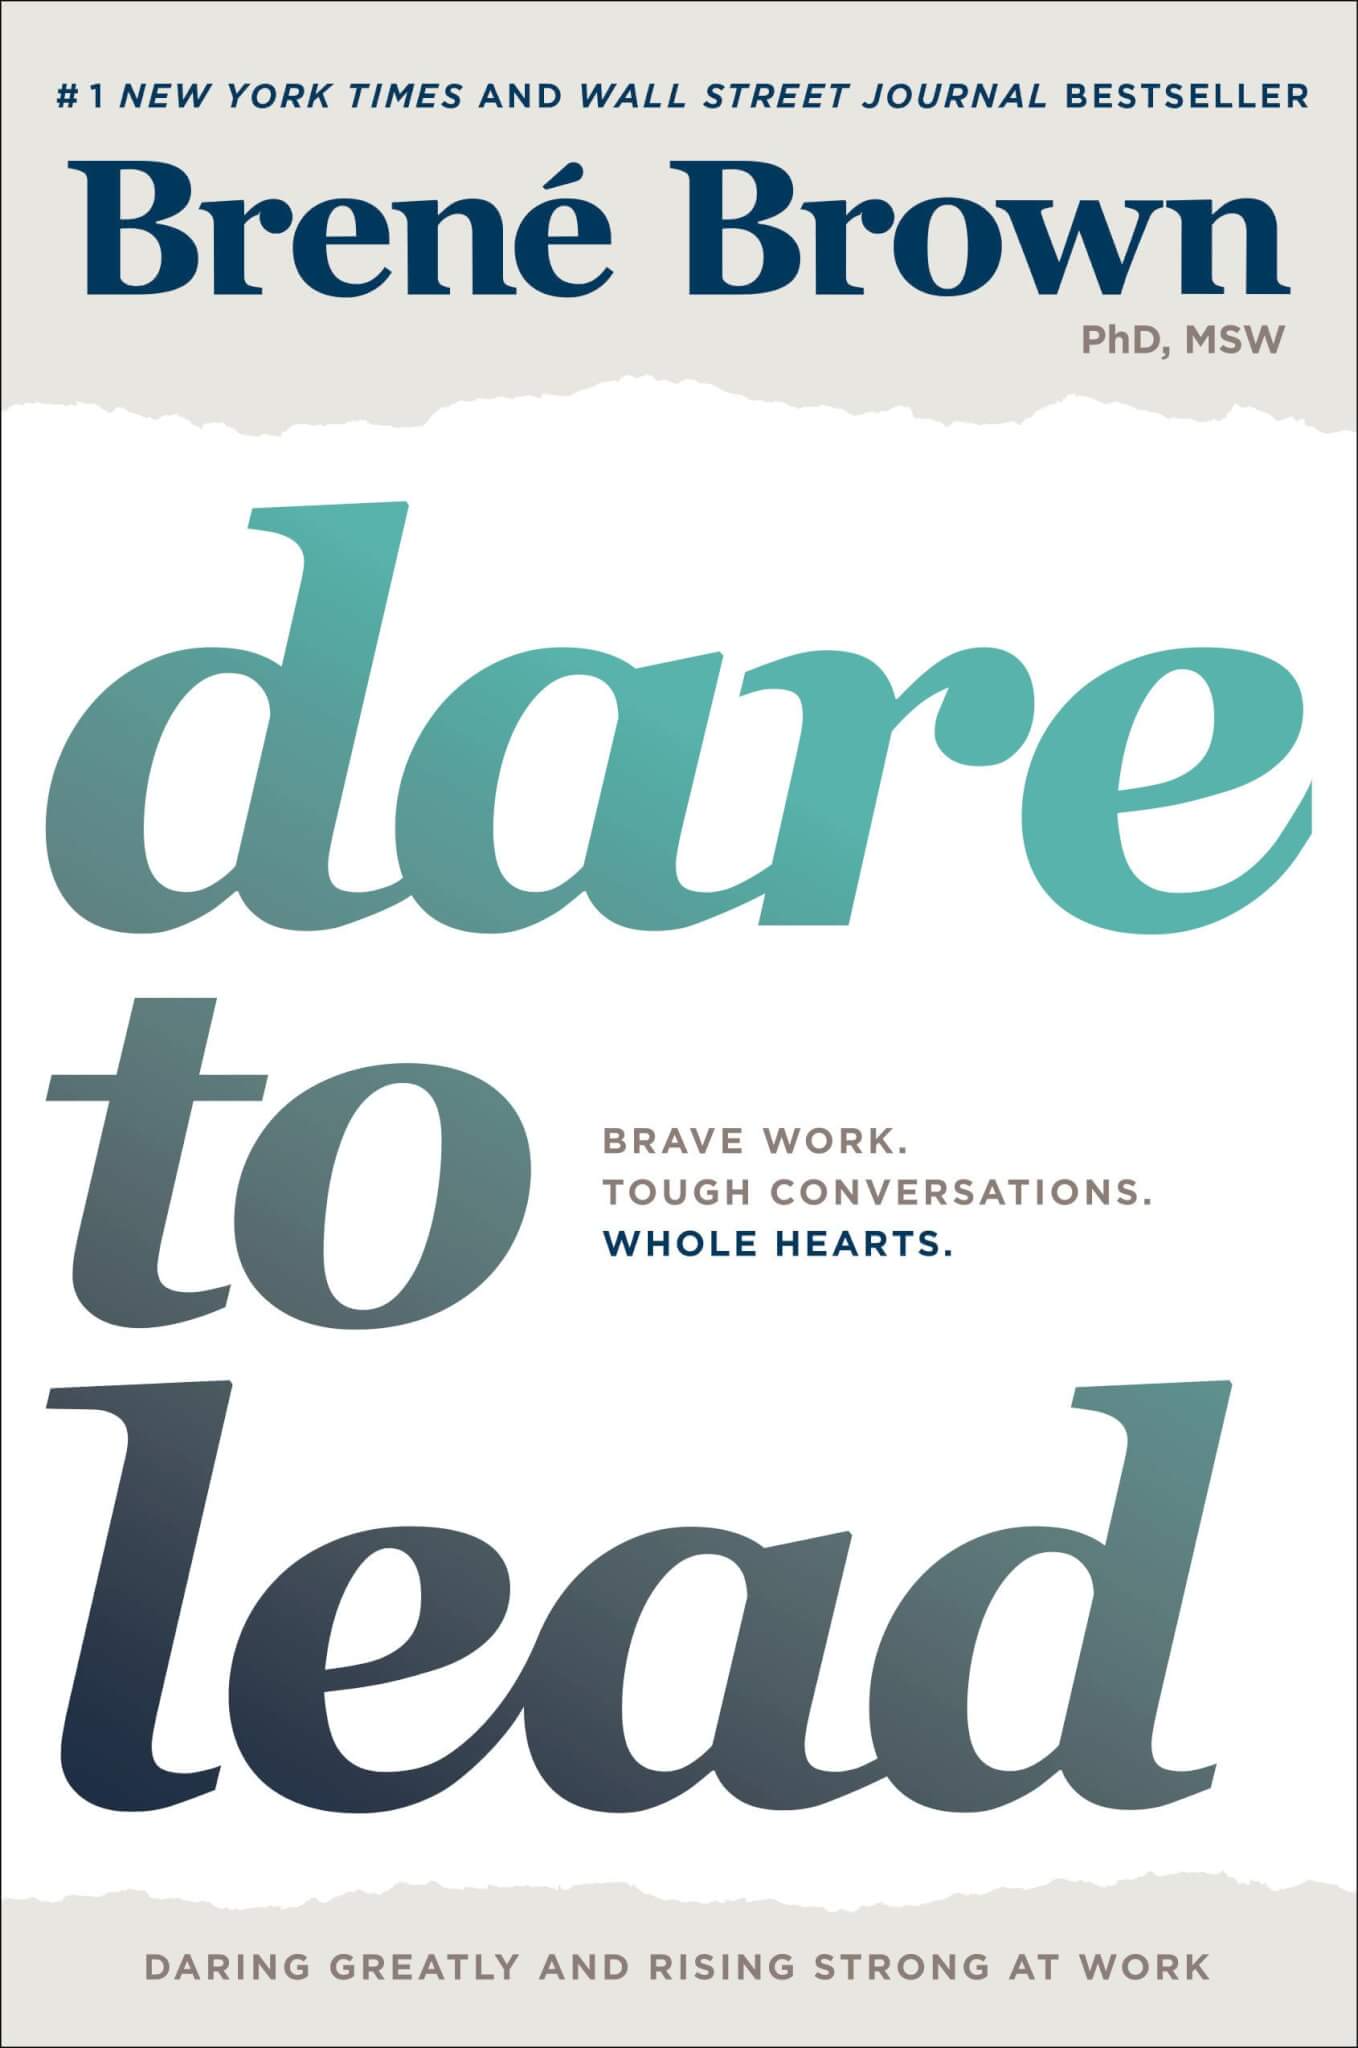 "Dare to Lead" by Brené Brown